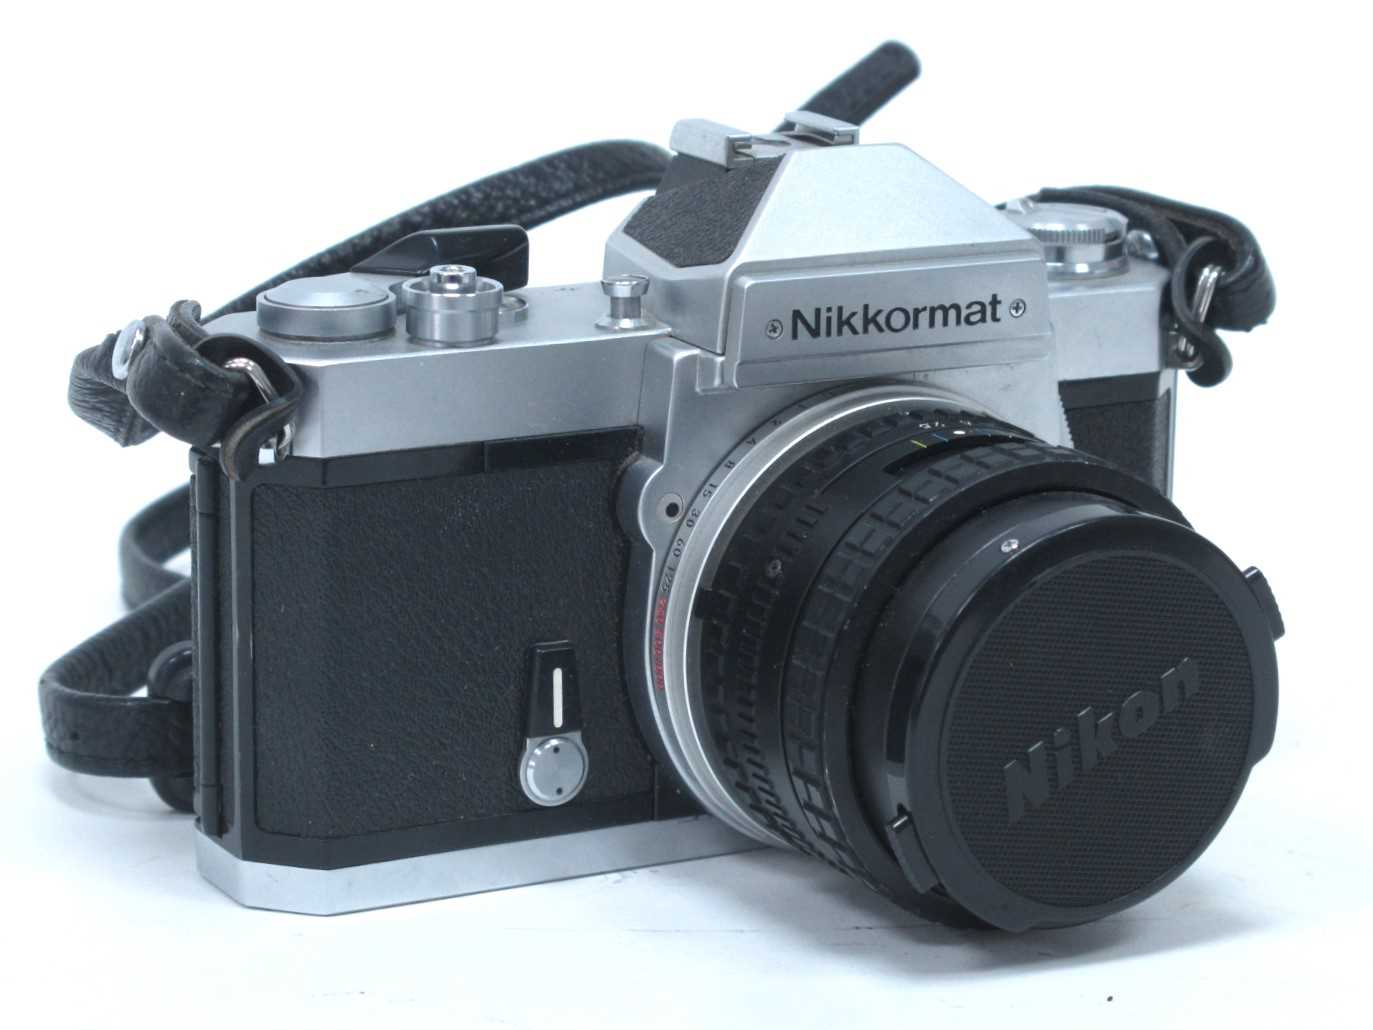 Nikkormat F73 6085735 Camera, having 35mm lens. Camera untested, unable to confirm in working